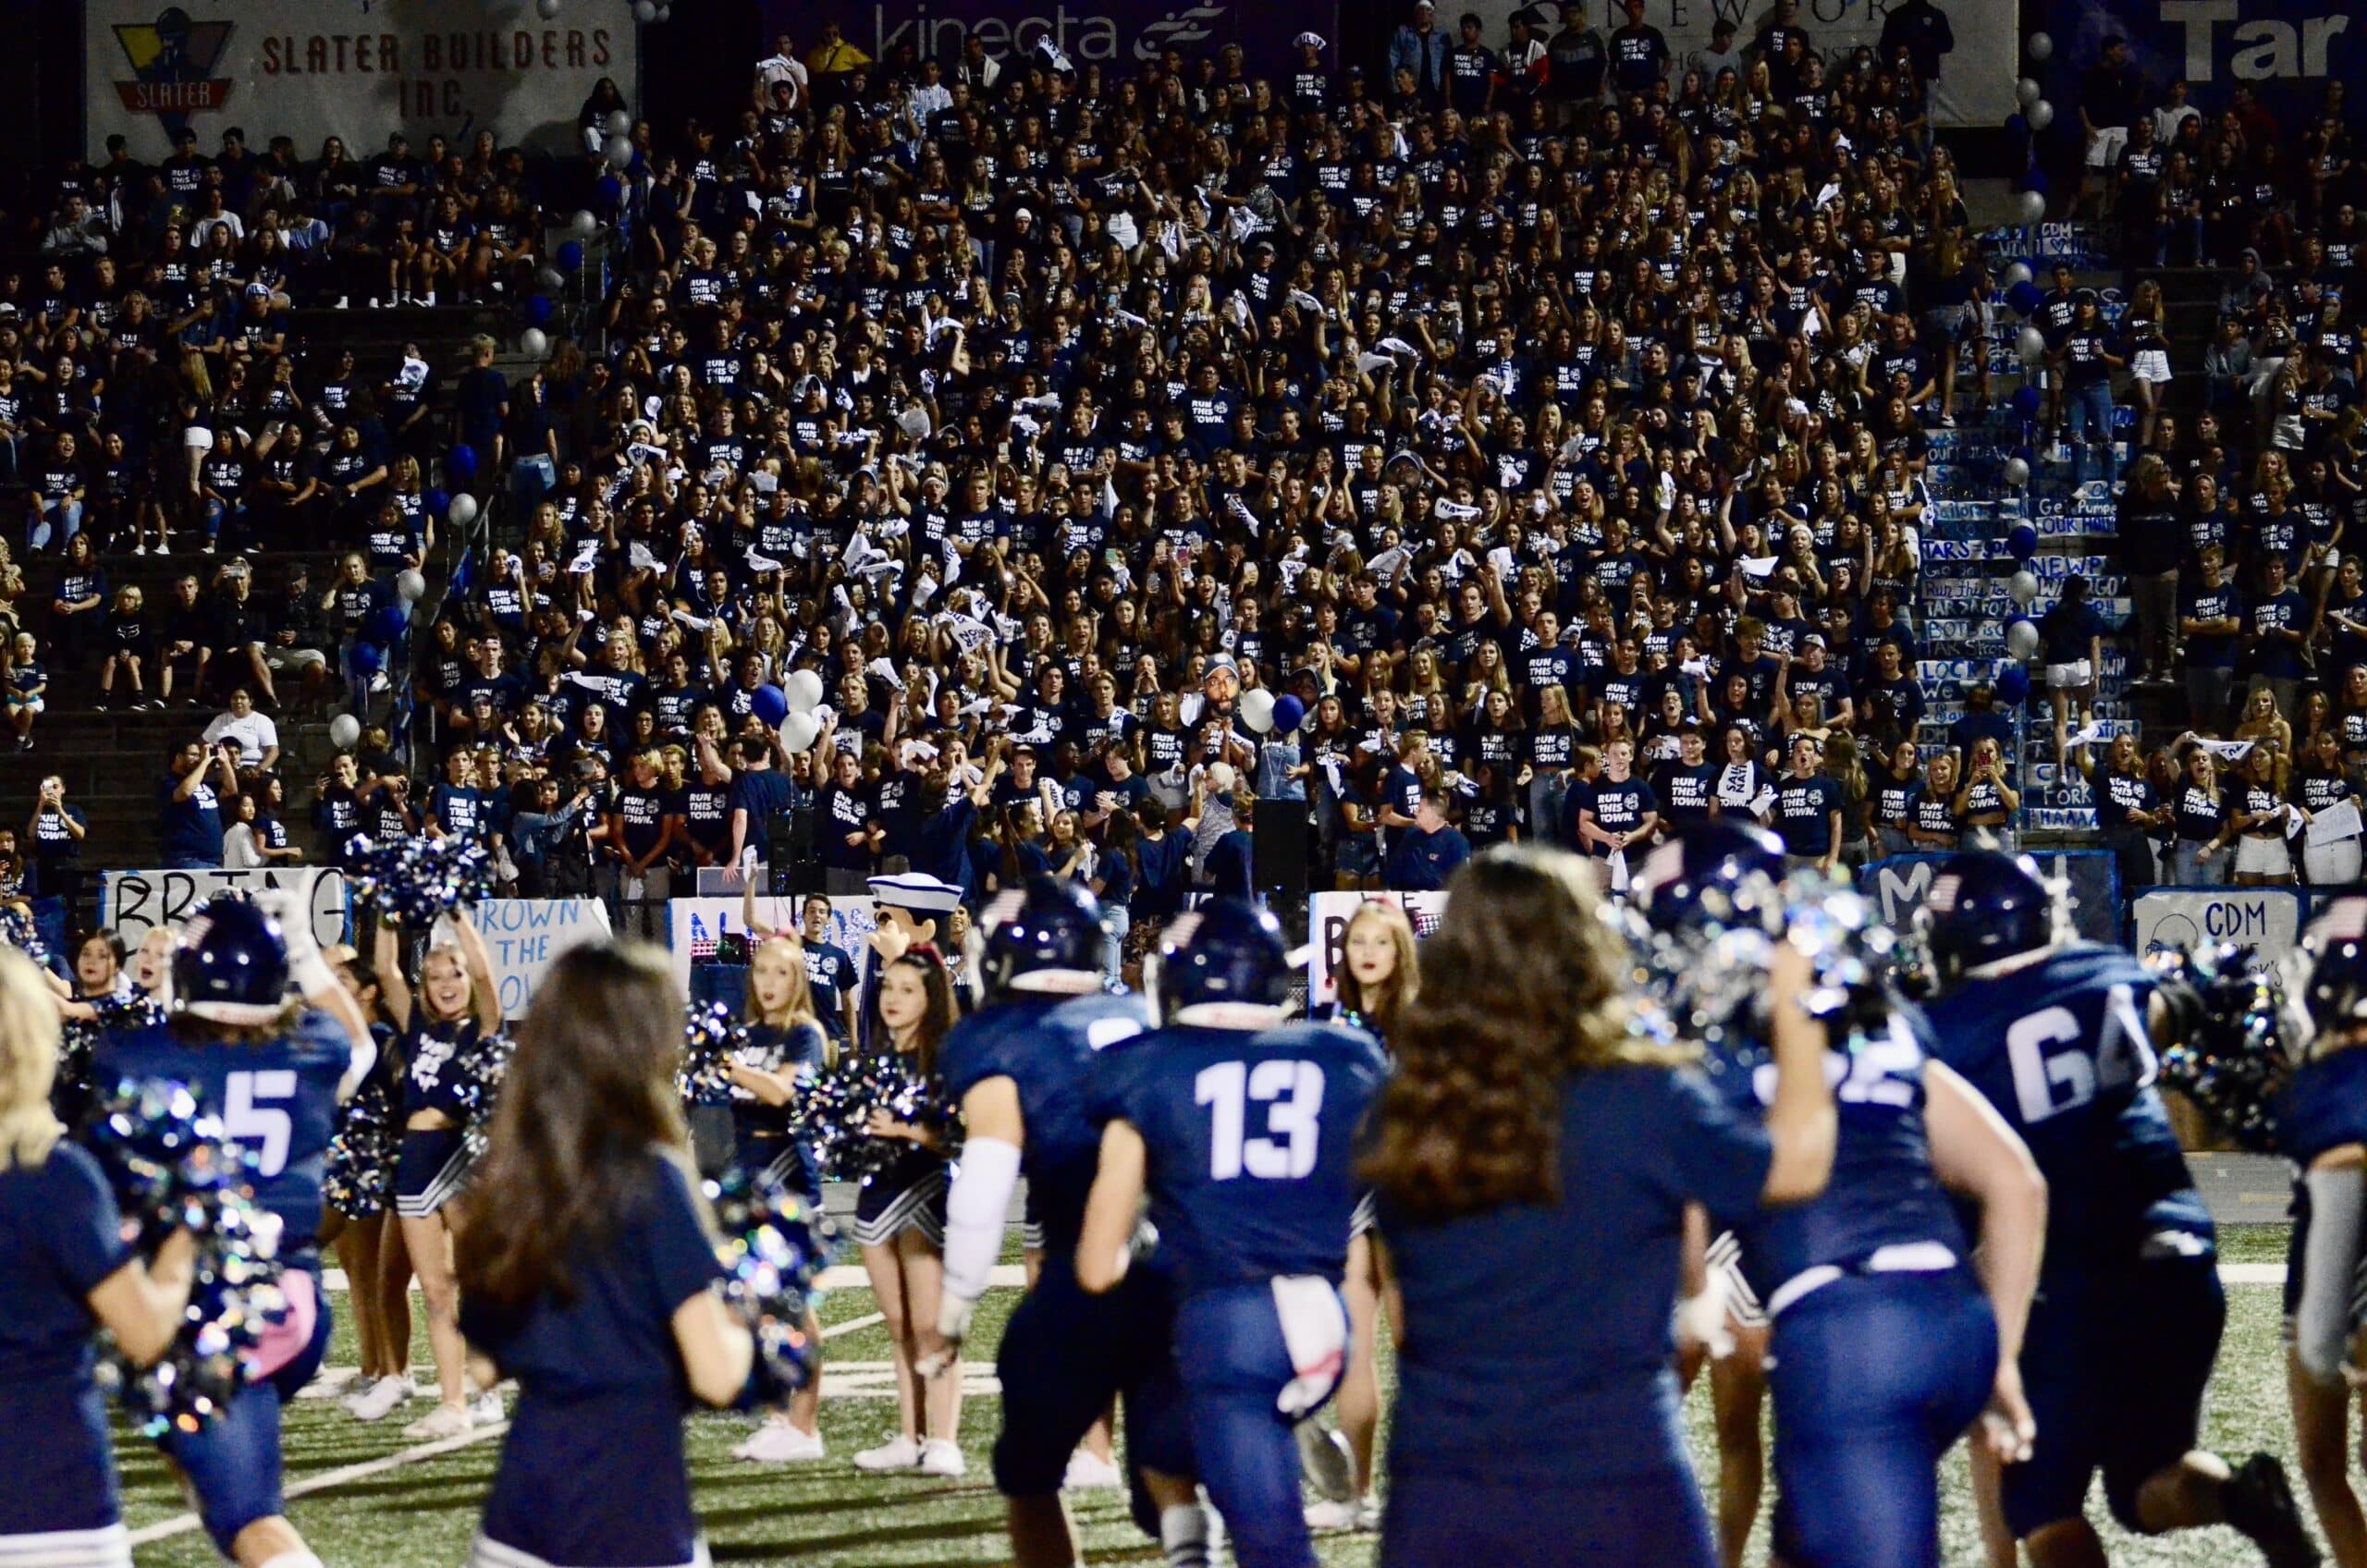 High school pep rally featuring students wearing 'run this town' merchandise, with football players and cheerleaders on the field and the spirited student section in the stands, showing their support and enthusiasm for the team.